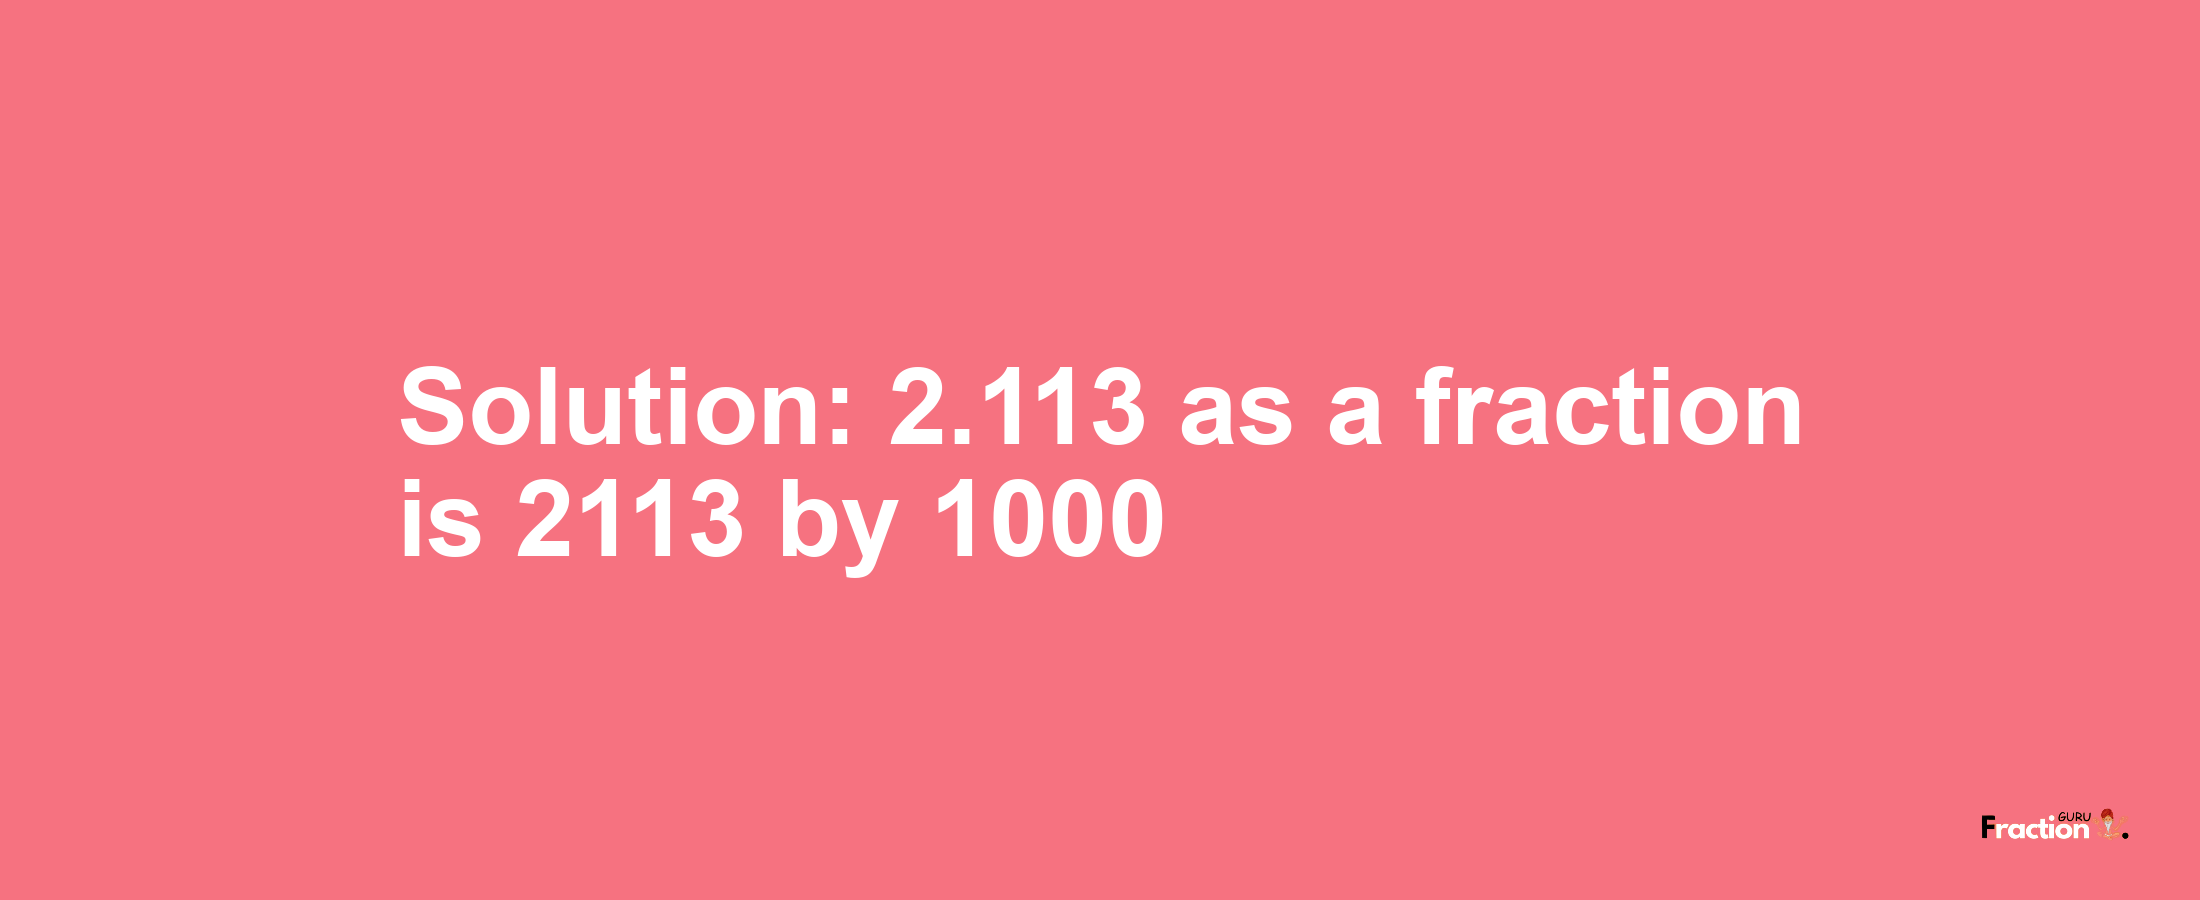 Solution:2.113 as a fraction is 2113/1000